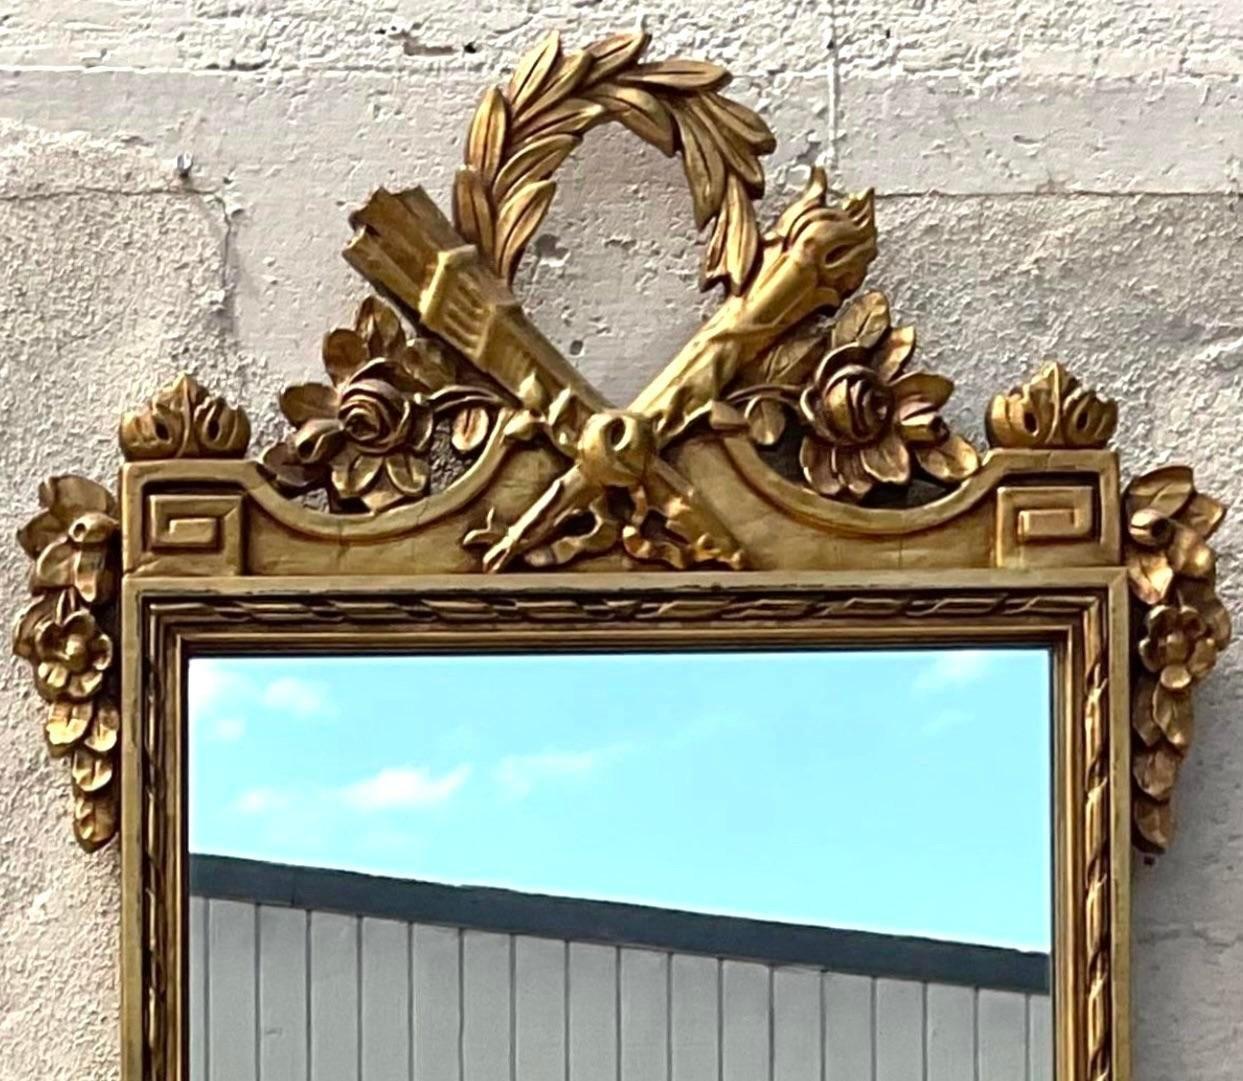 Enhance your space with the grandeur of this Vintage Regency monumental Greek Key gilt mirror. With its classic American Regency design, this mirror exudes timeless elegance and sophistication. A statement piece that adds a touch of glamour and